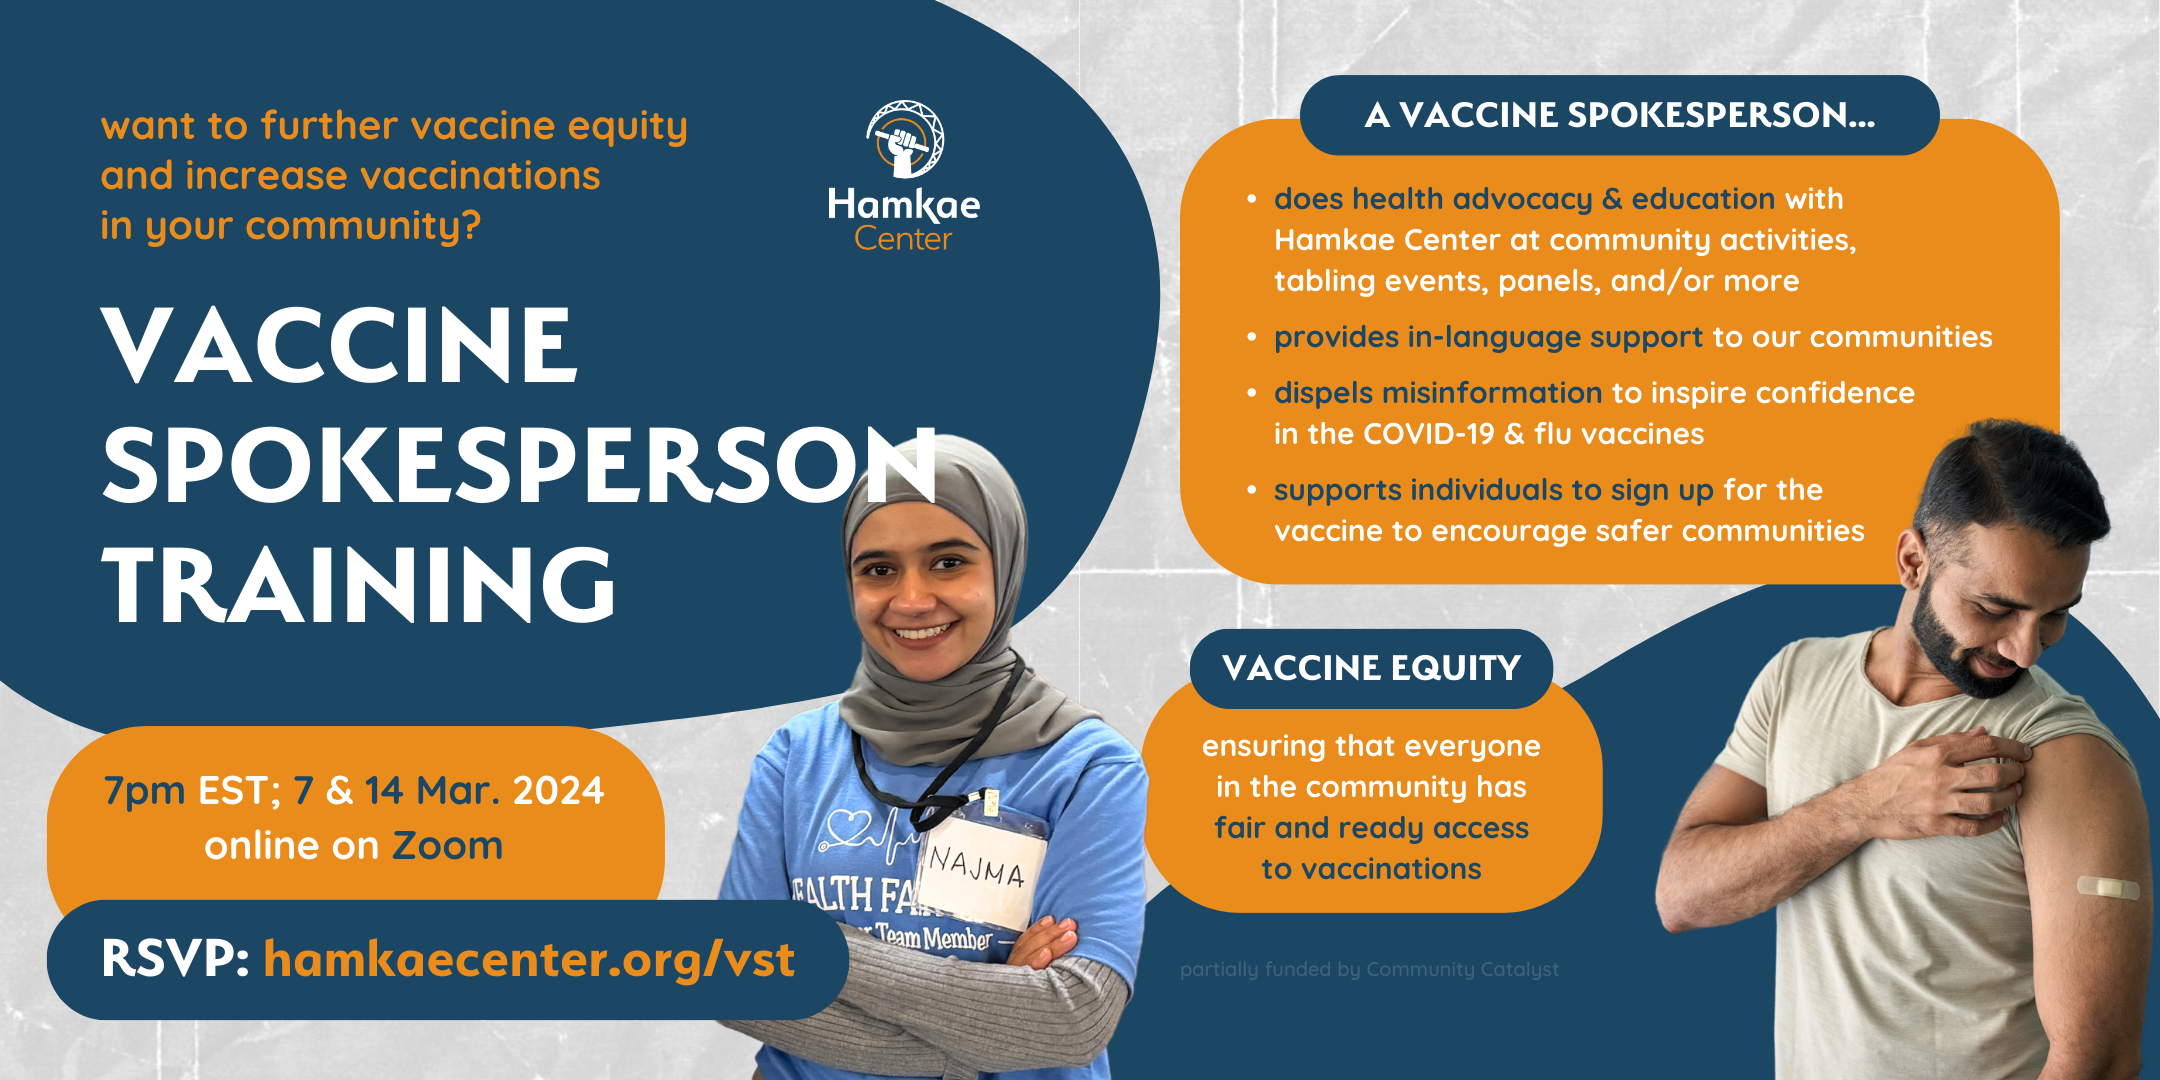 Want to further vaccine equity and increase vaccinations in your community? Hamkae Center's Vaccine Spokesperson Training 7pm EST on 7 & 14 March 2024; online on Zoom. RSVP: hamkaecenter.org/vst Cutout of a Najma, a young Indonesian woman wearing a hijab and smiling while crossing her arms. A vaccine spokesperson... - Conducts health advocacy & education with Hamkae Center at community activities, tabling events, panels, and/or more - Provides in-language support to our communities - Dispels misinformation to inspire confidence in the COVID-19 & flu vaccines - Supports individuals to sign up for the vaccine to encourage safer communities Vaccine Equity: Ensuring that everyone in the community has fair and ready access to vaccinations Partially funded by Community Catalyst. Cutout of an Indian man smiling and holding up his t-shirt sleeve to look at the bandage plastered on his upper left arm.